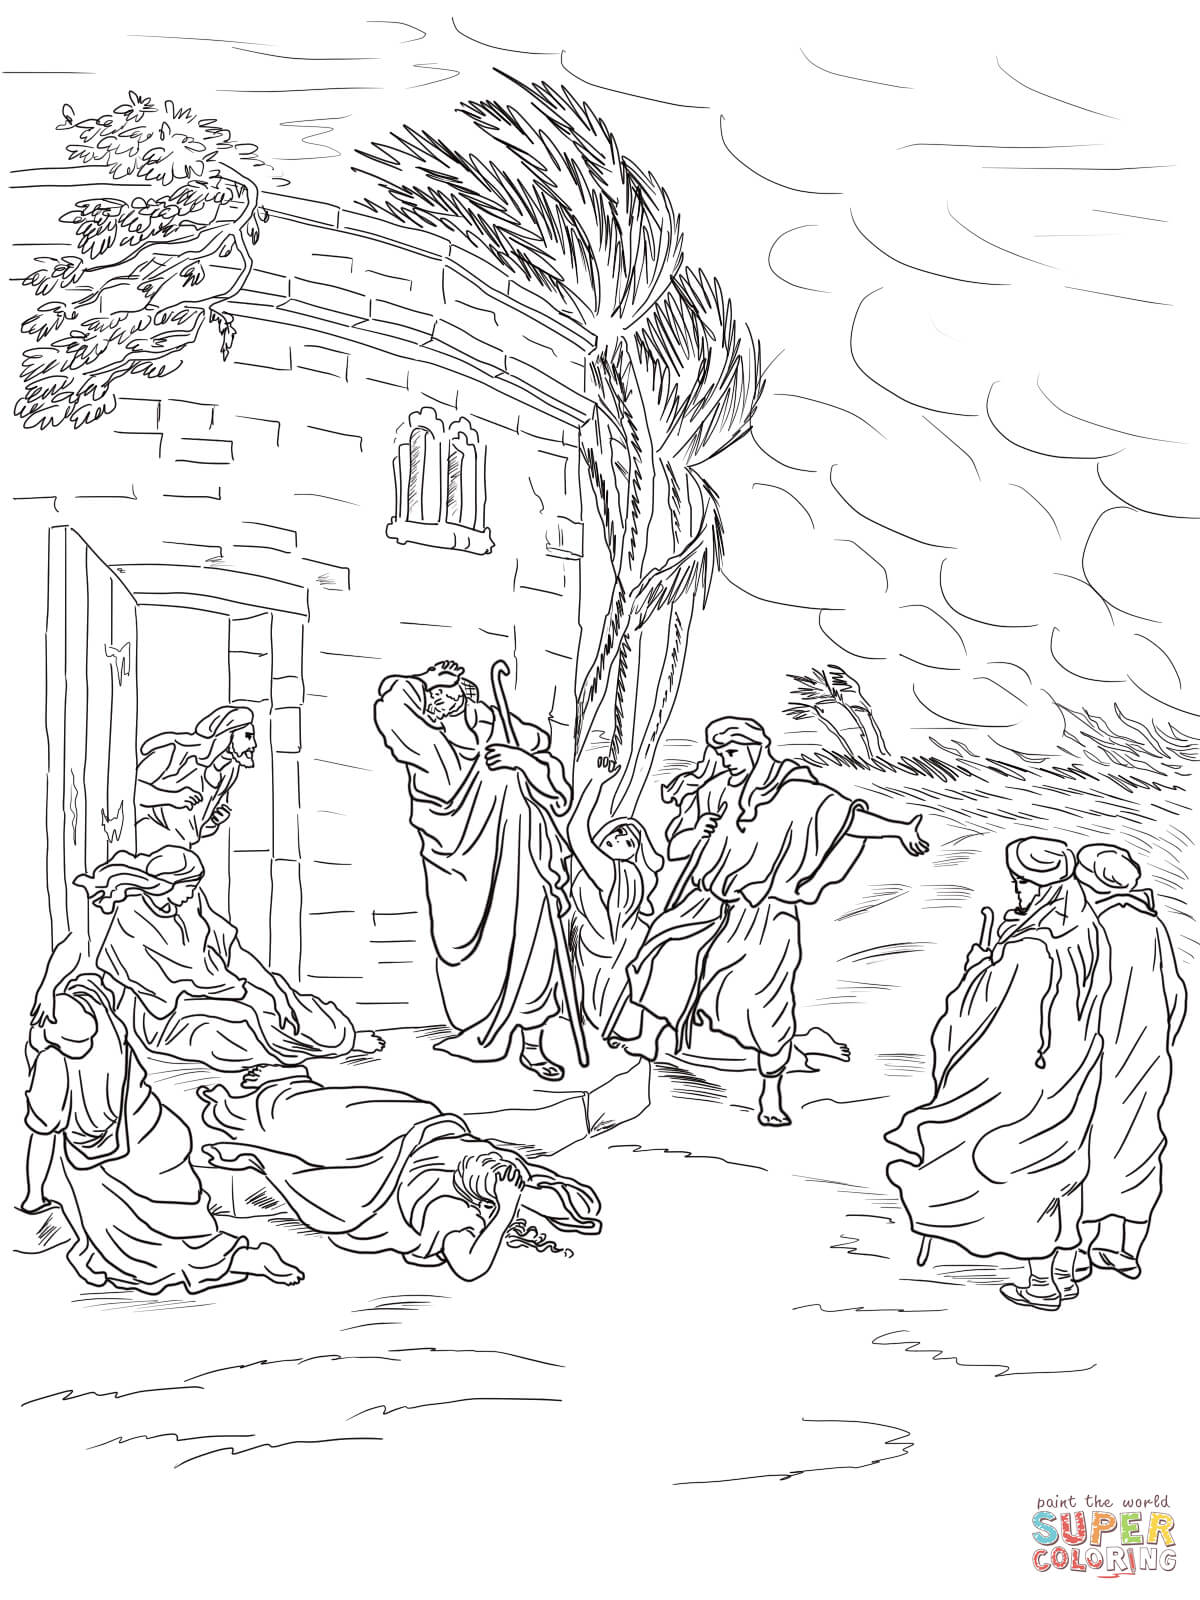 10 Job Hearing Of His Ruin By Gustav Dore Coloring Page